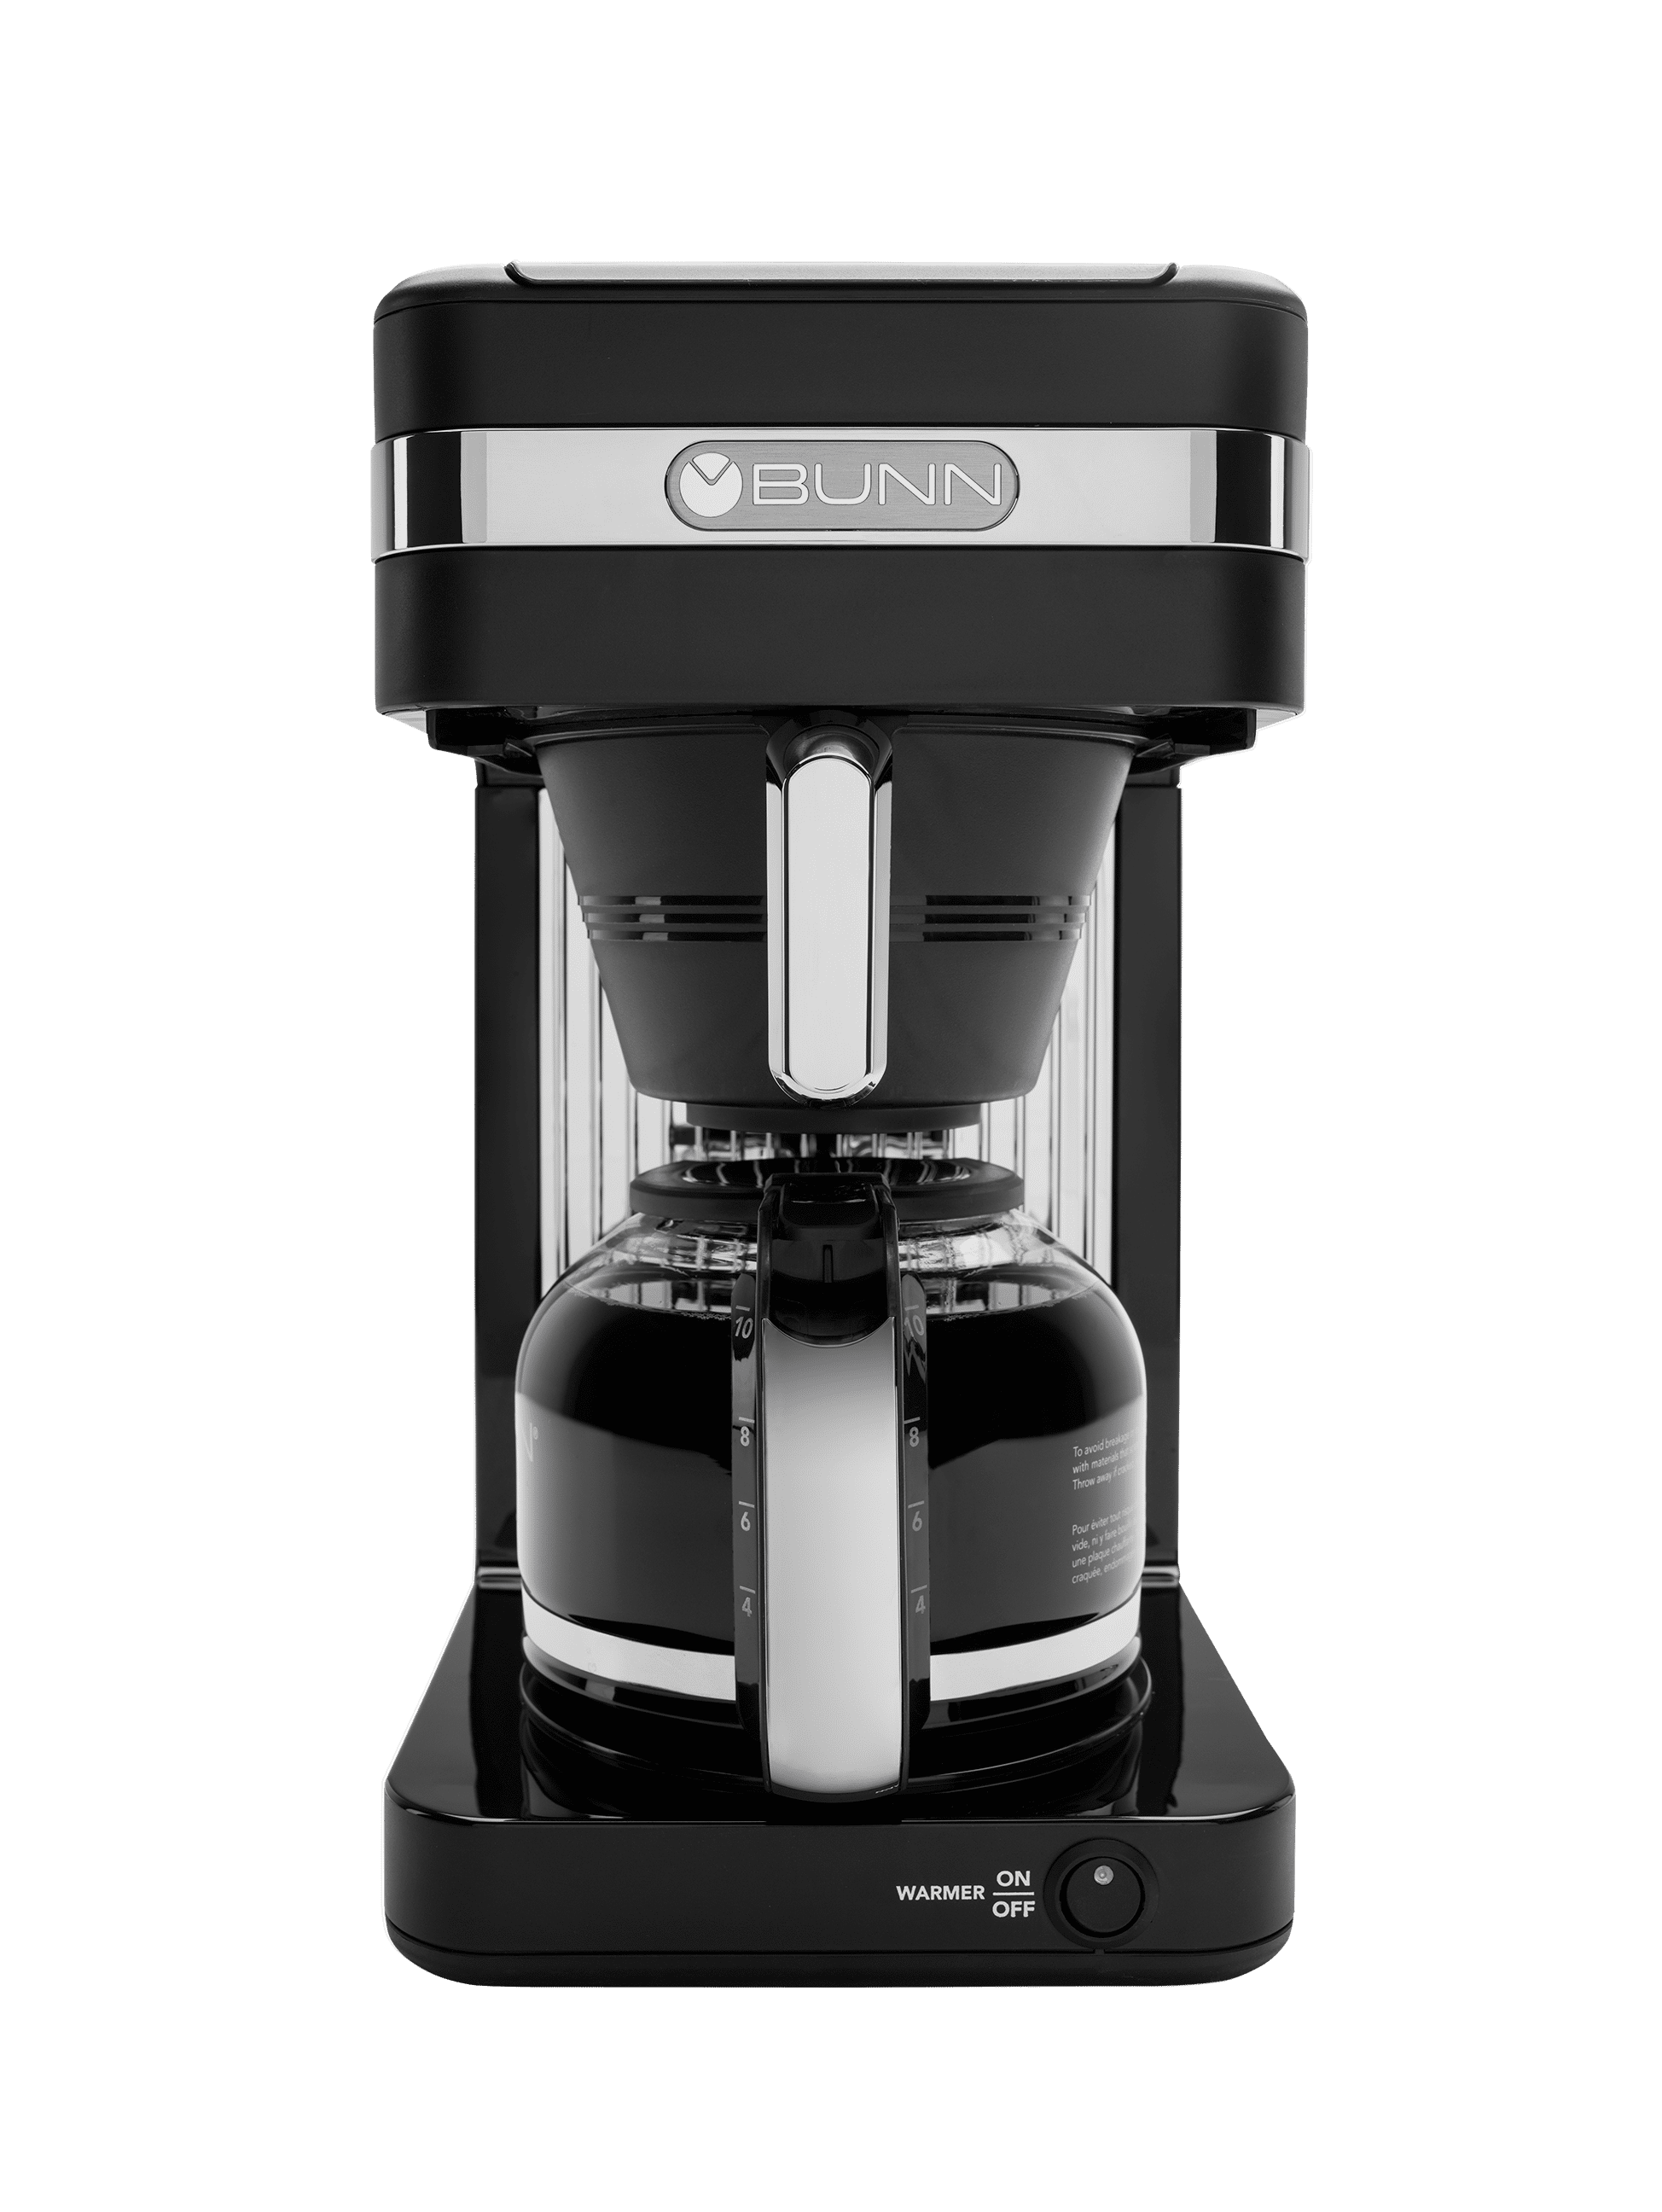 7 Iced-Coffee Machines That Make Café-Quality Cold Brew – Robb Report